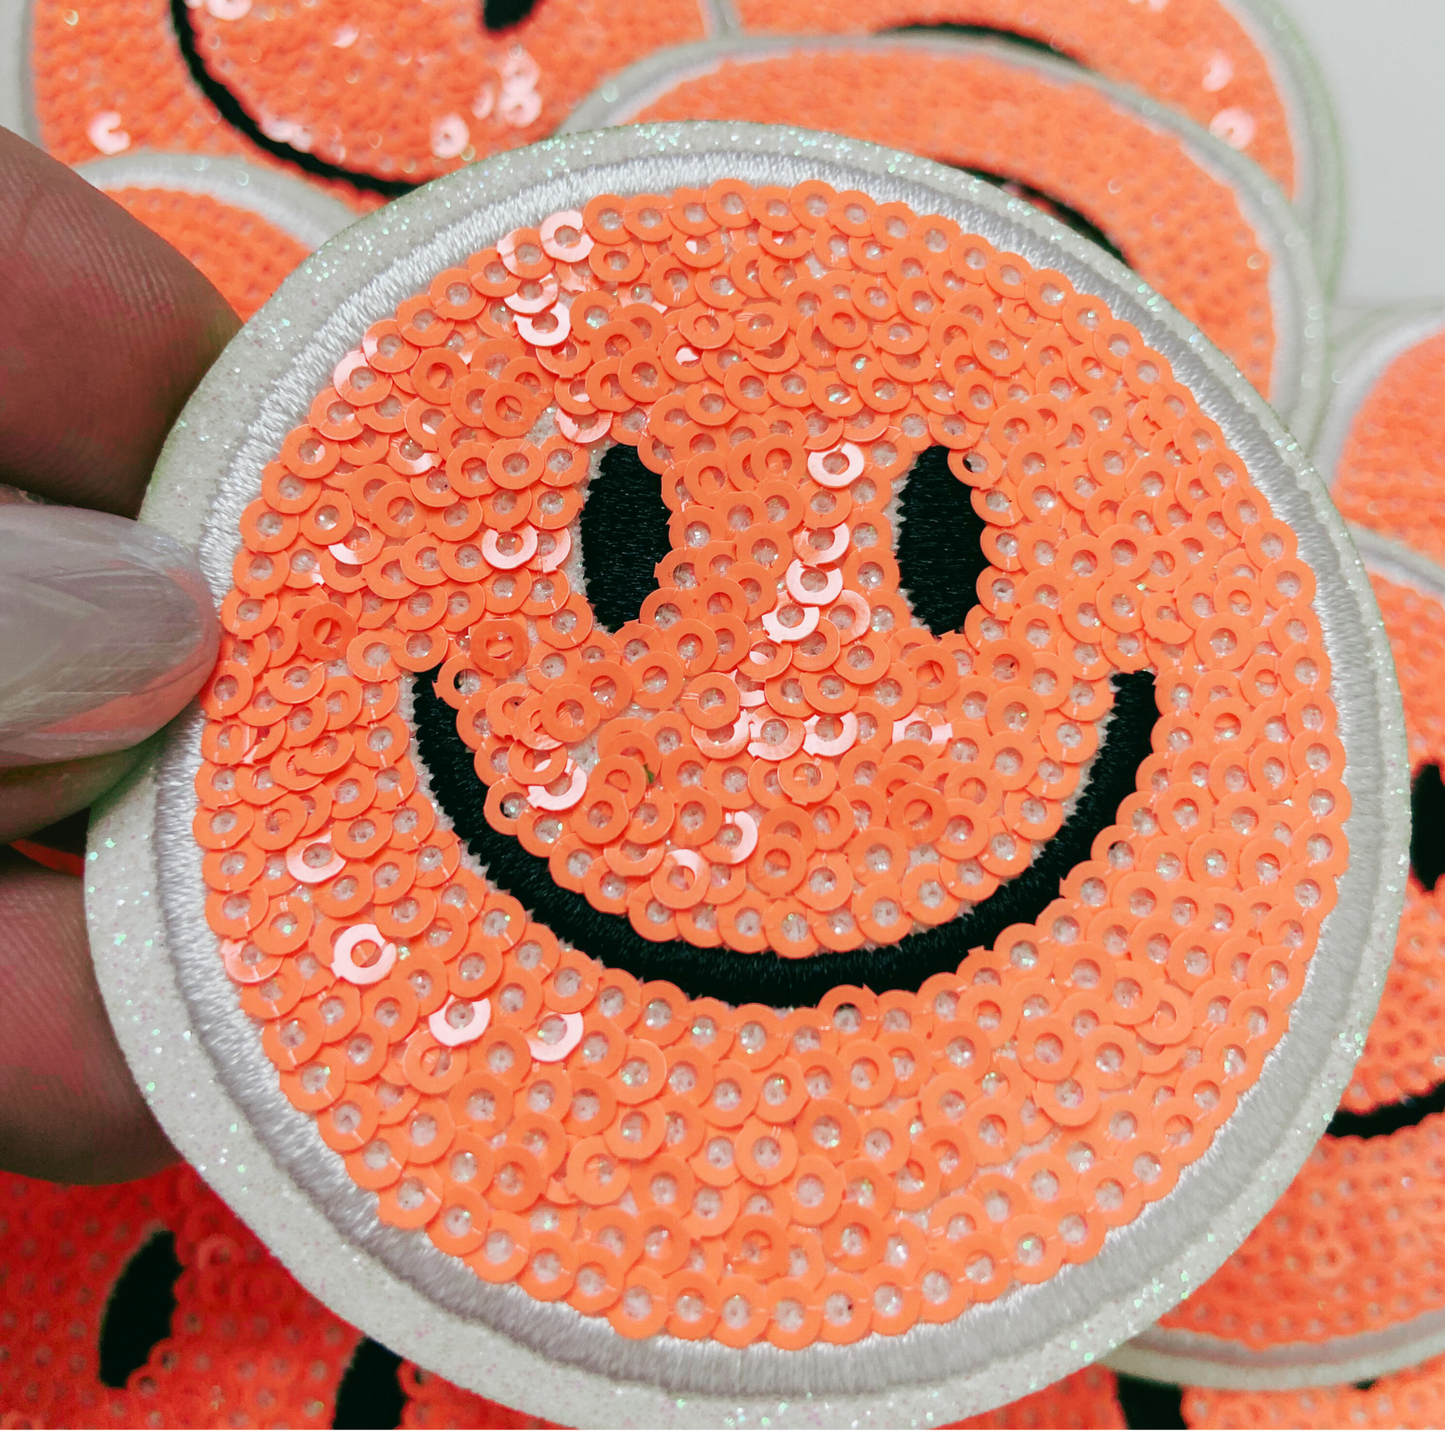 NEON Sequin Smiley Face Patch - 2.5" x 2.5"  - hat Patch